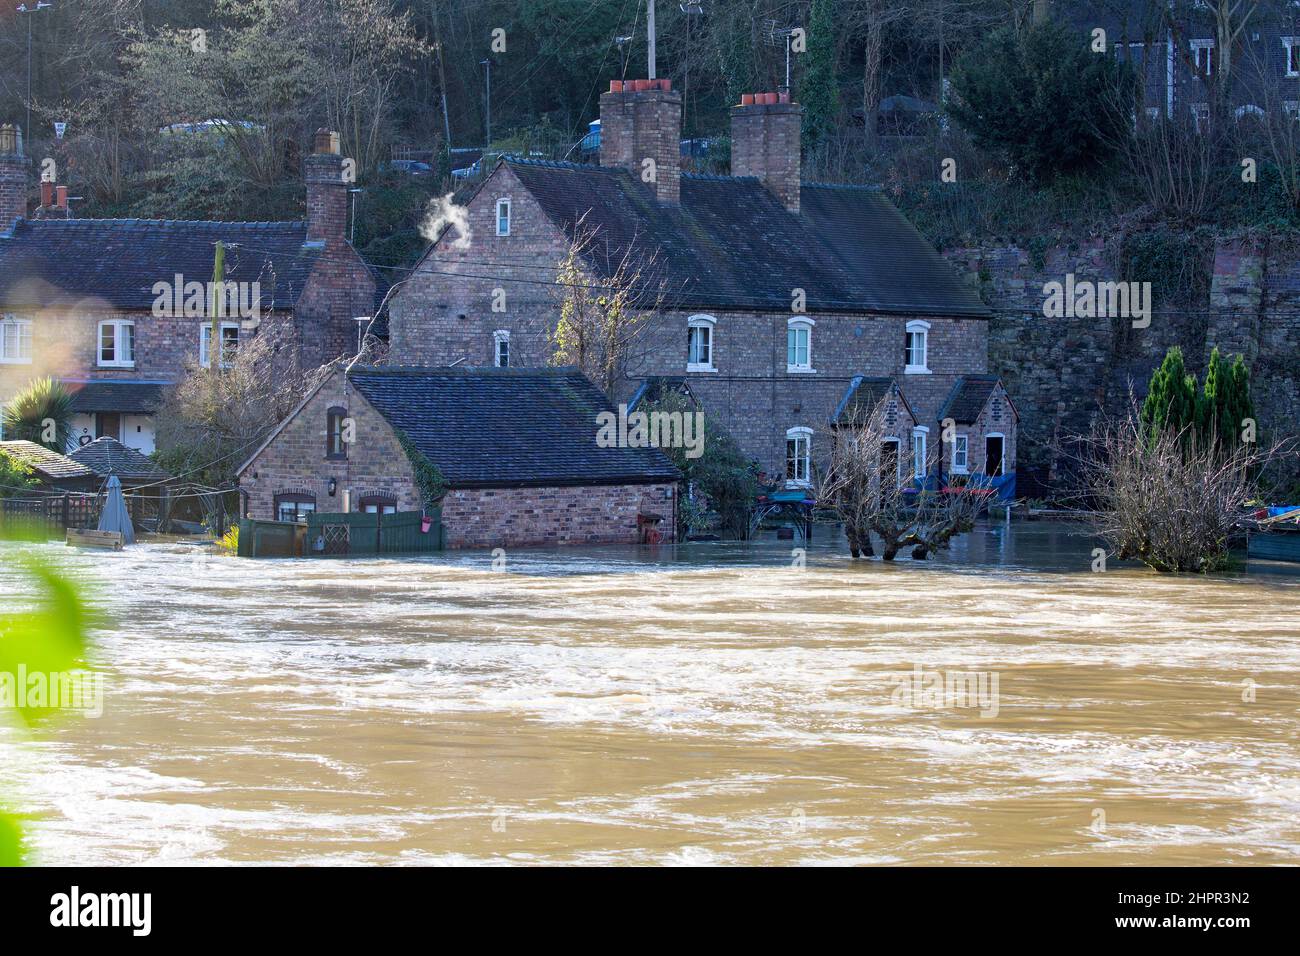 Shropshire, England. 23/02/2022,  Properties along the banks of the River Severn in The Ironbridge Gorge World Heritage Site in Shropshire, England, remain flooded as River Levels continue to remain high following a wekk of floods. Stock Photo